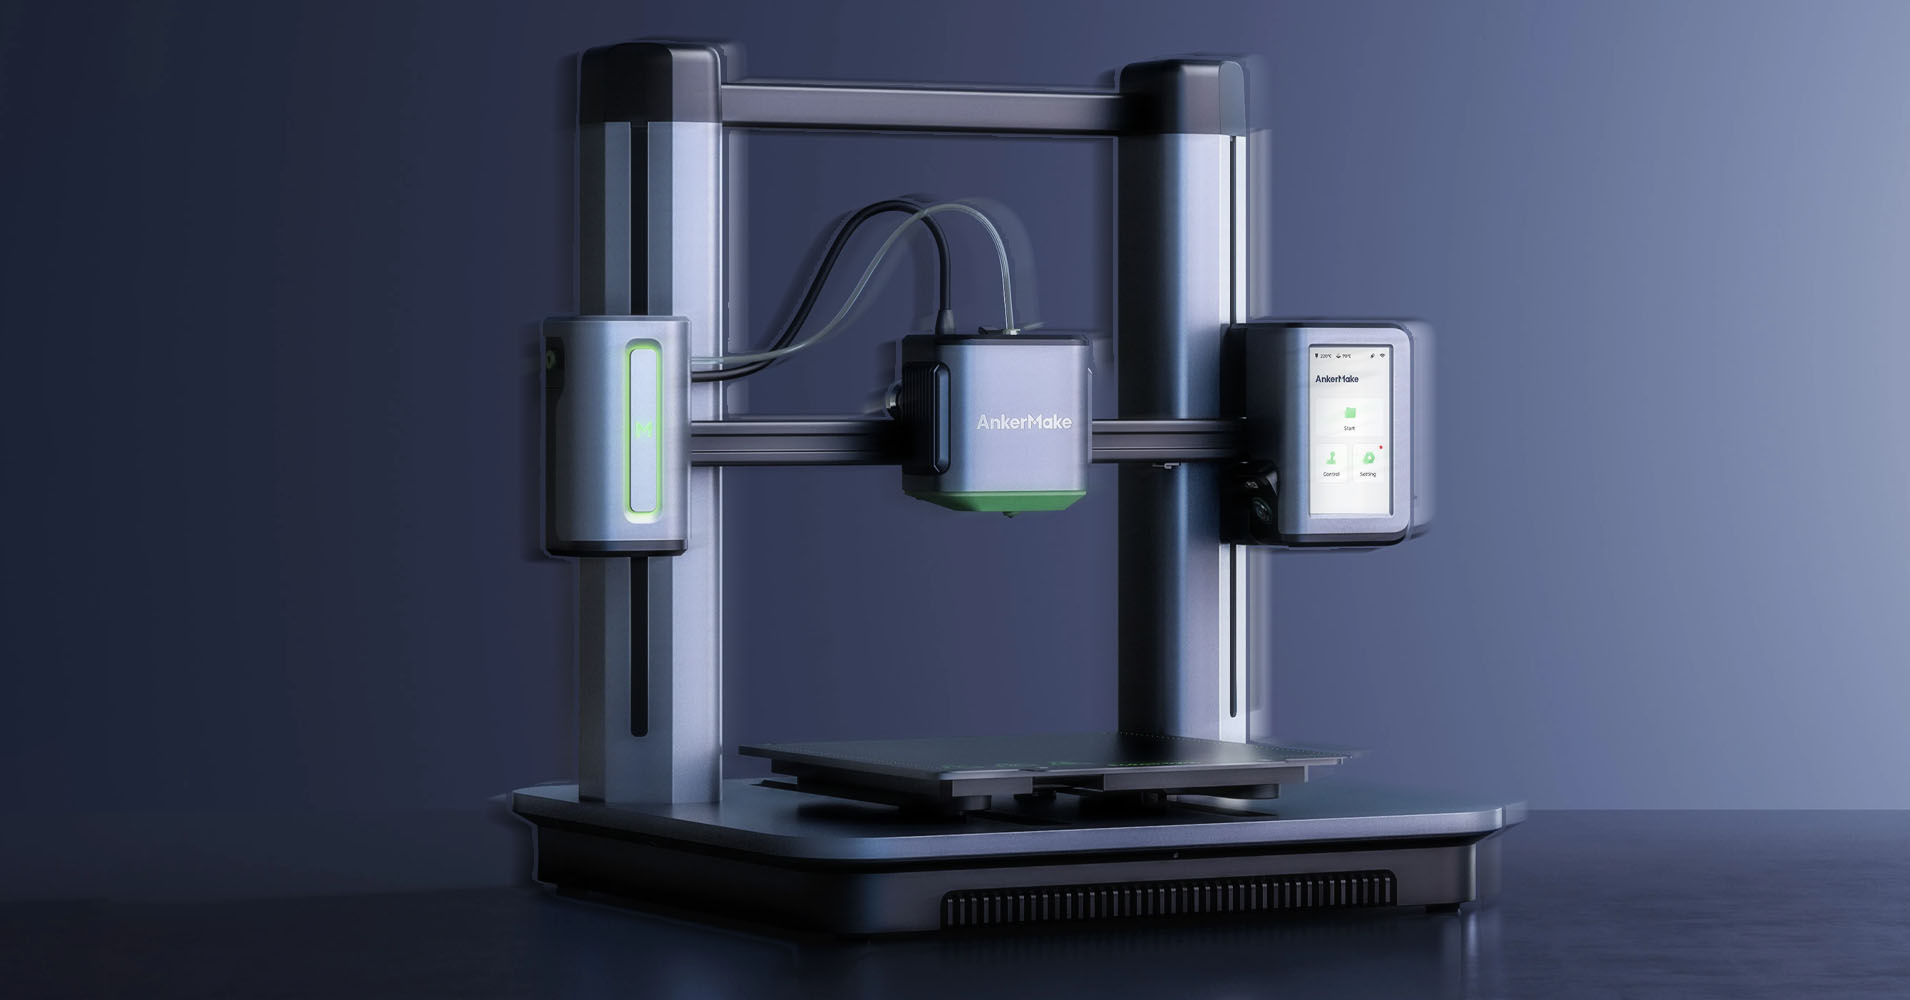 Anker says its first 3D printer is 5x faster than others, and I want believe